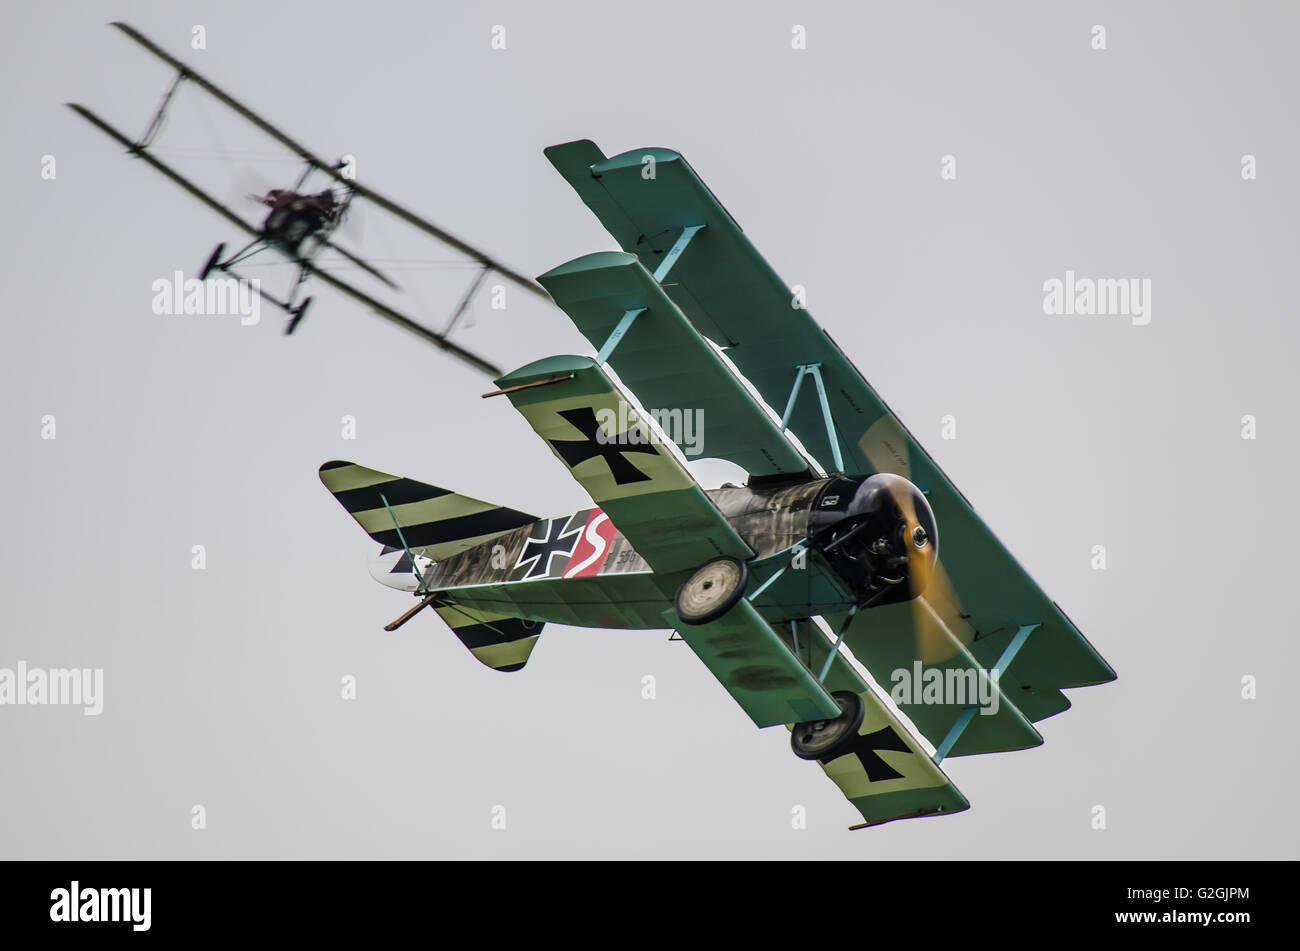 An allied S.E.5 gets on to the tail of a Fokker Dr.1 during a First World War dogfight re-enactment at an air display Stock Photo